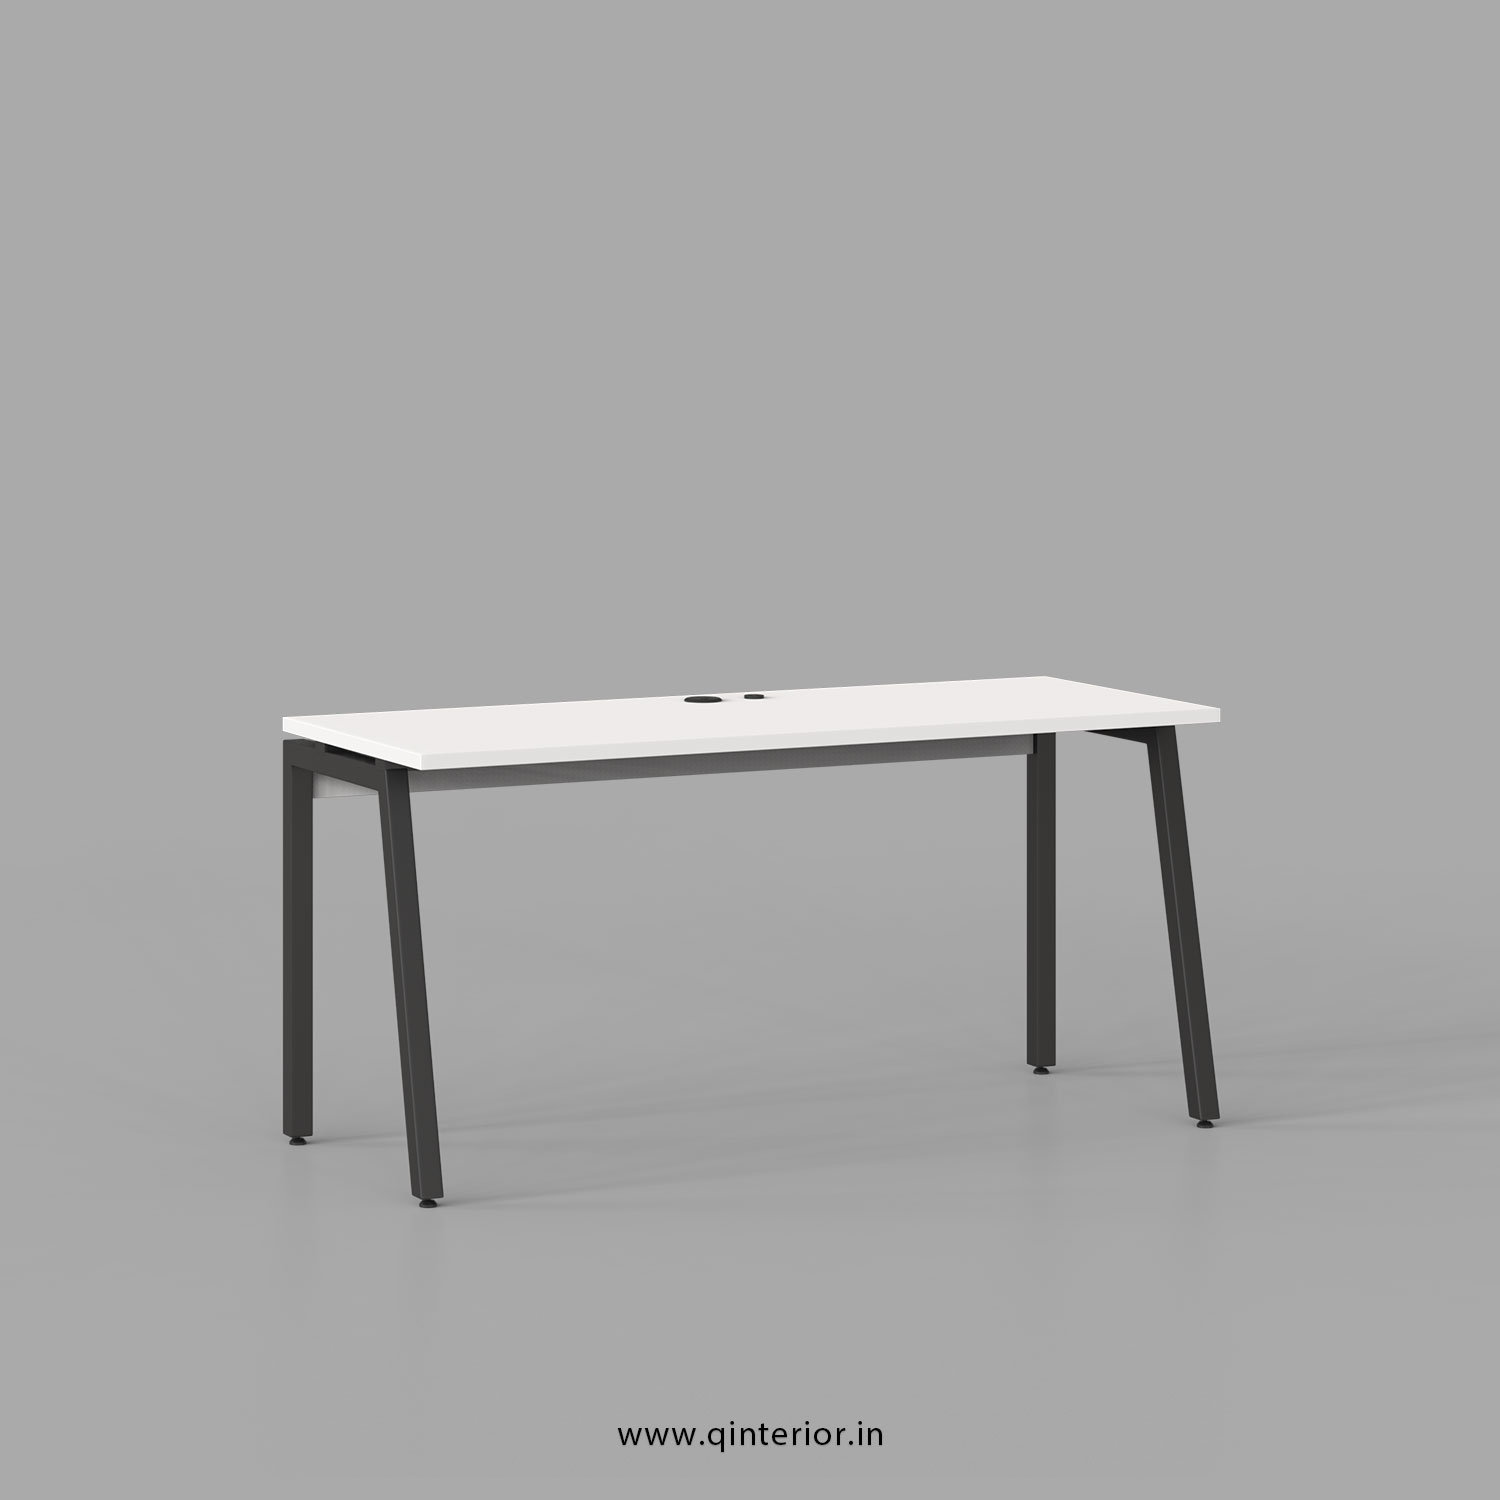 Berg Work Station in White Finish - OWS001 C4